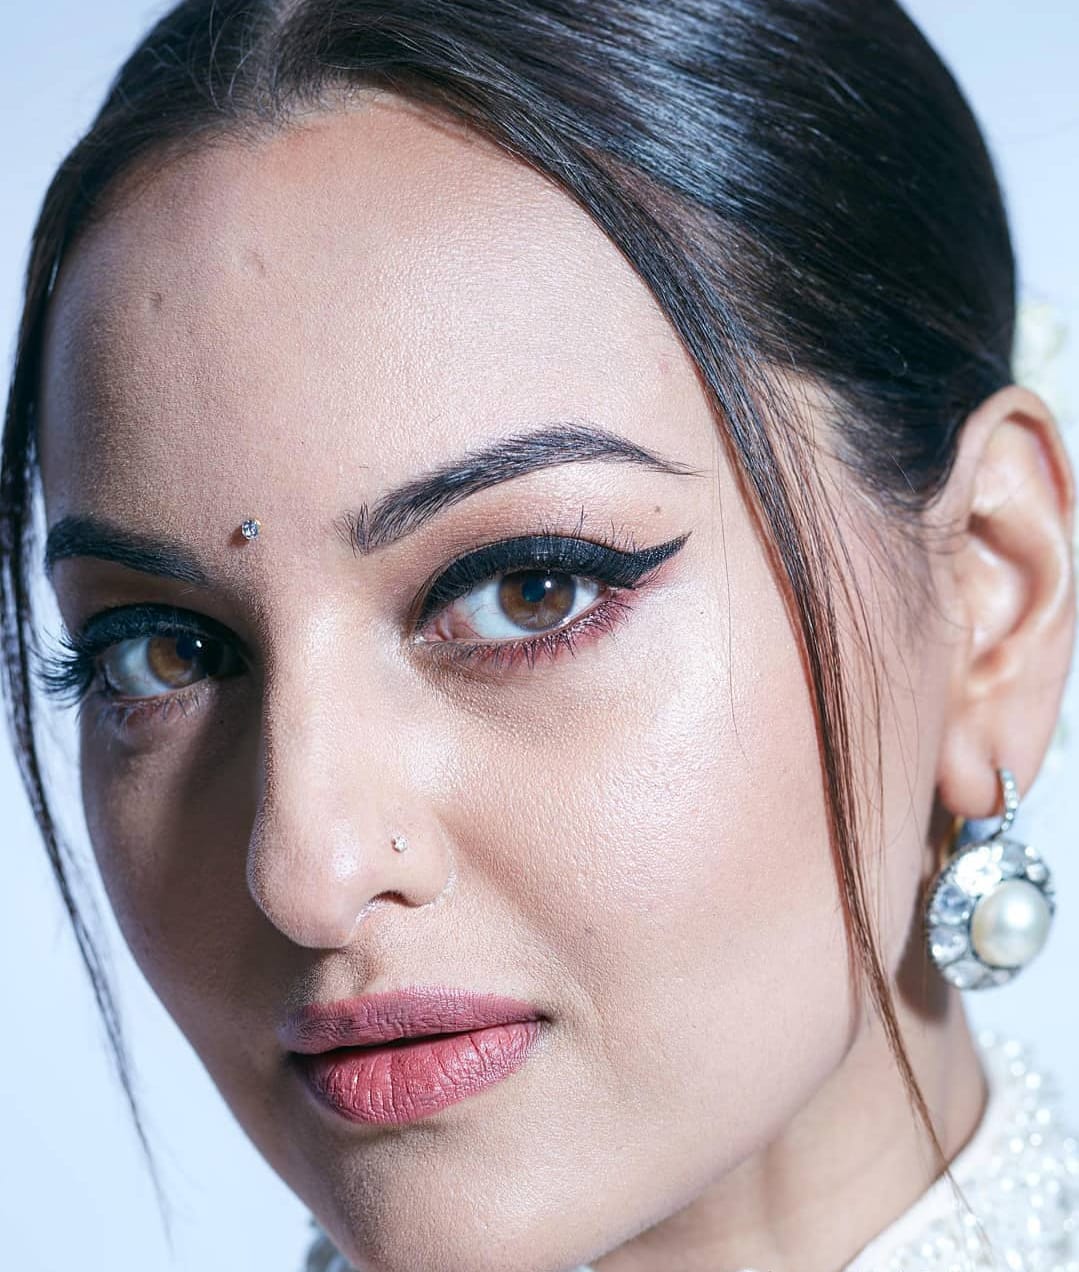 Bollywood Celebrity Sonakshi Sinha's Best Stunning Sensuous Top Pics From  The Lens Of GPN - #GlobalPrimeNews | Global Prime News